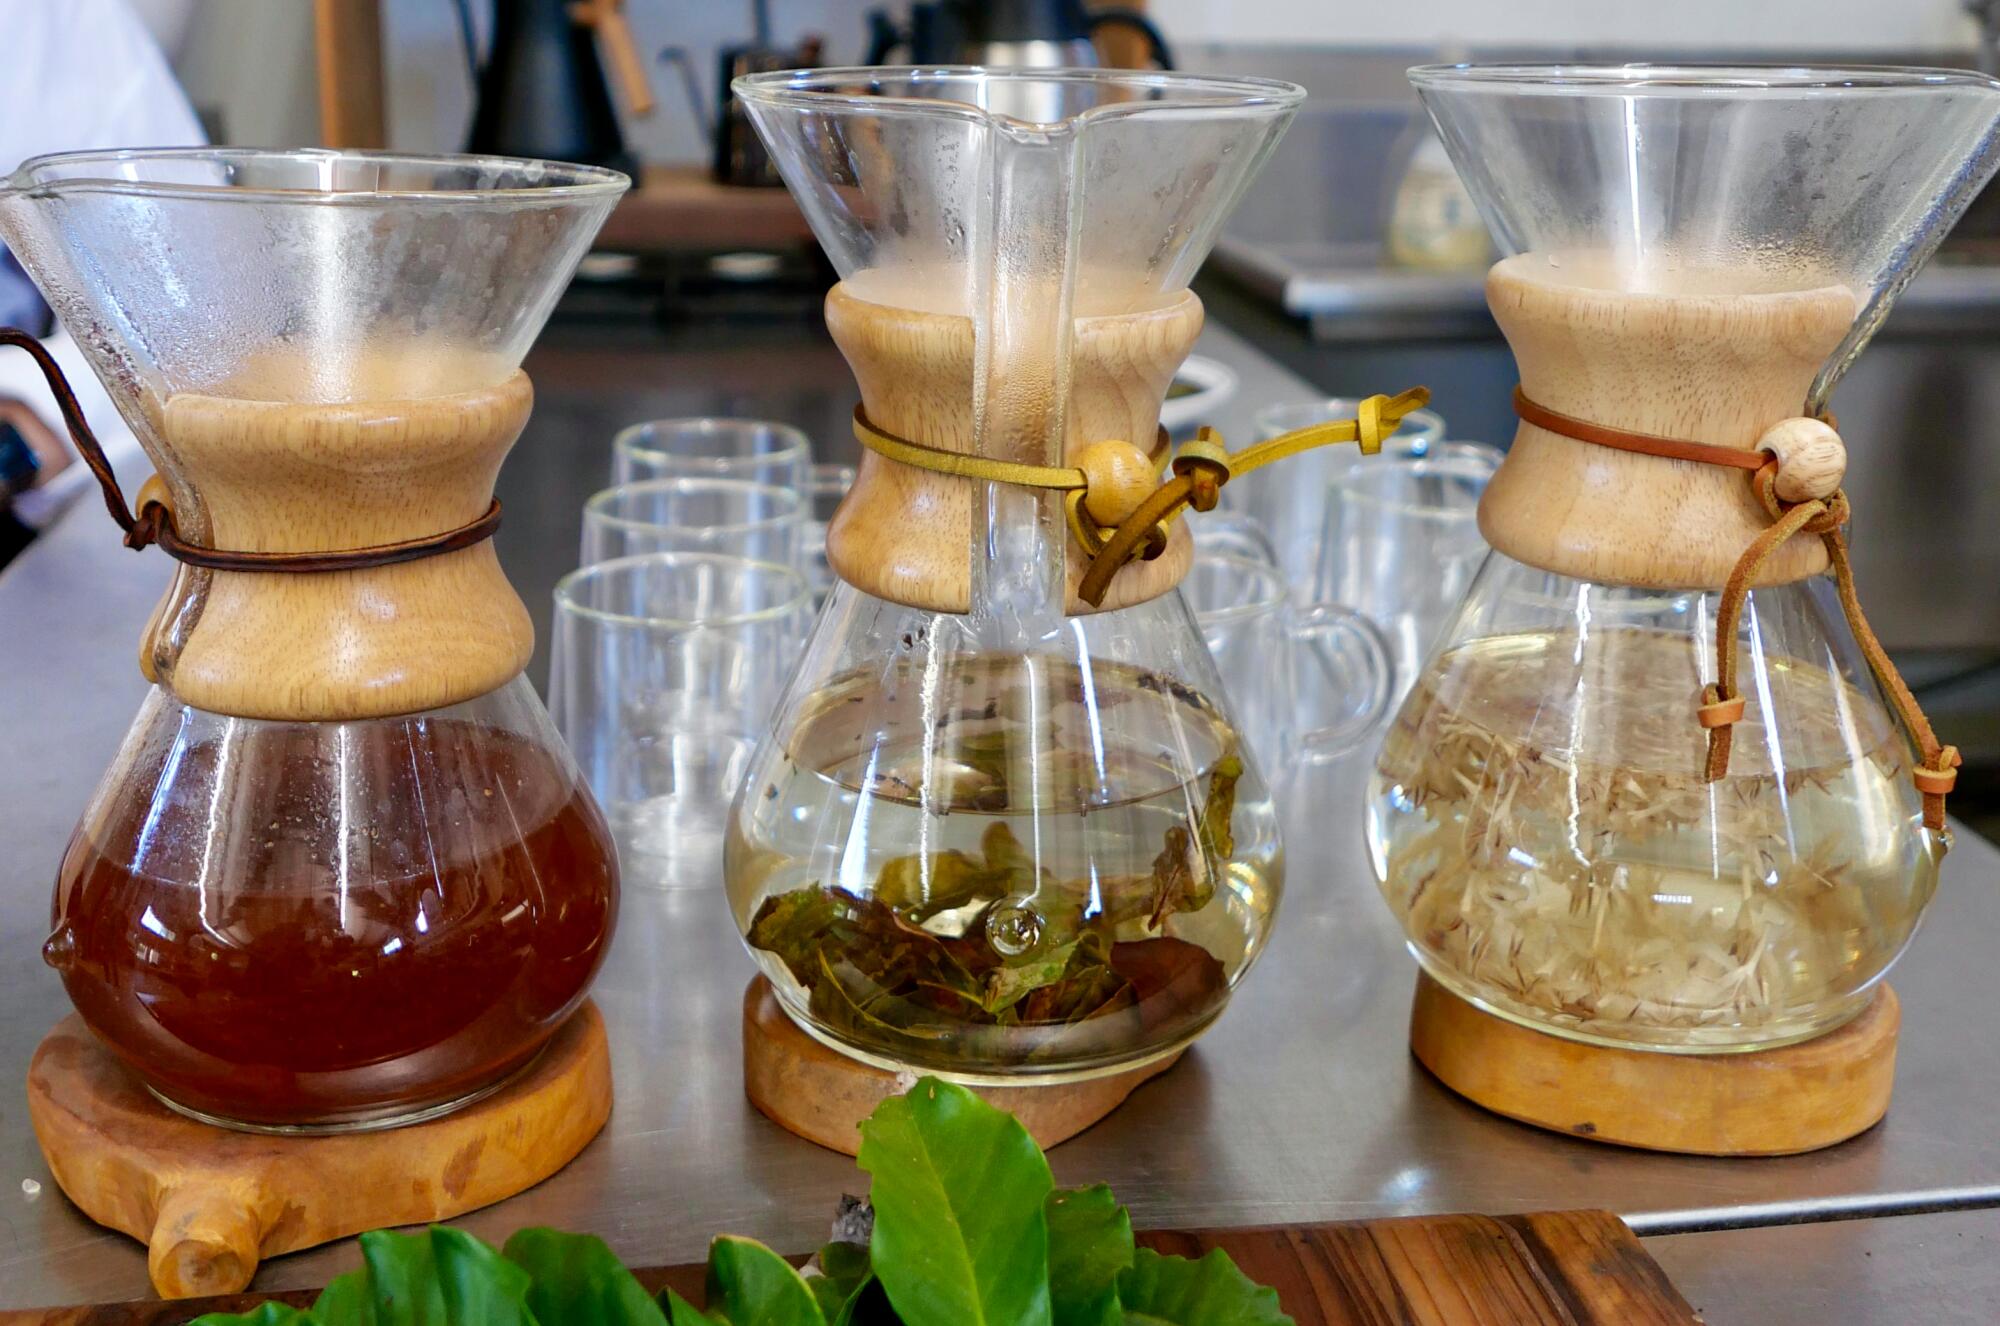 Various parts of the coffee plant, including the leaves and flowers, for brewed infusions.